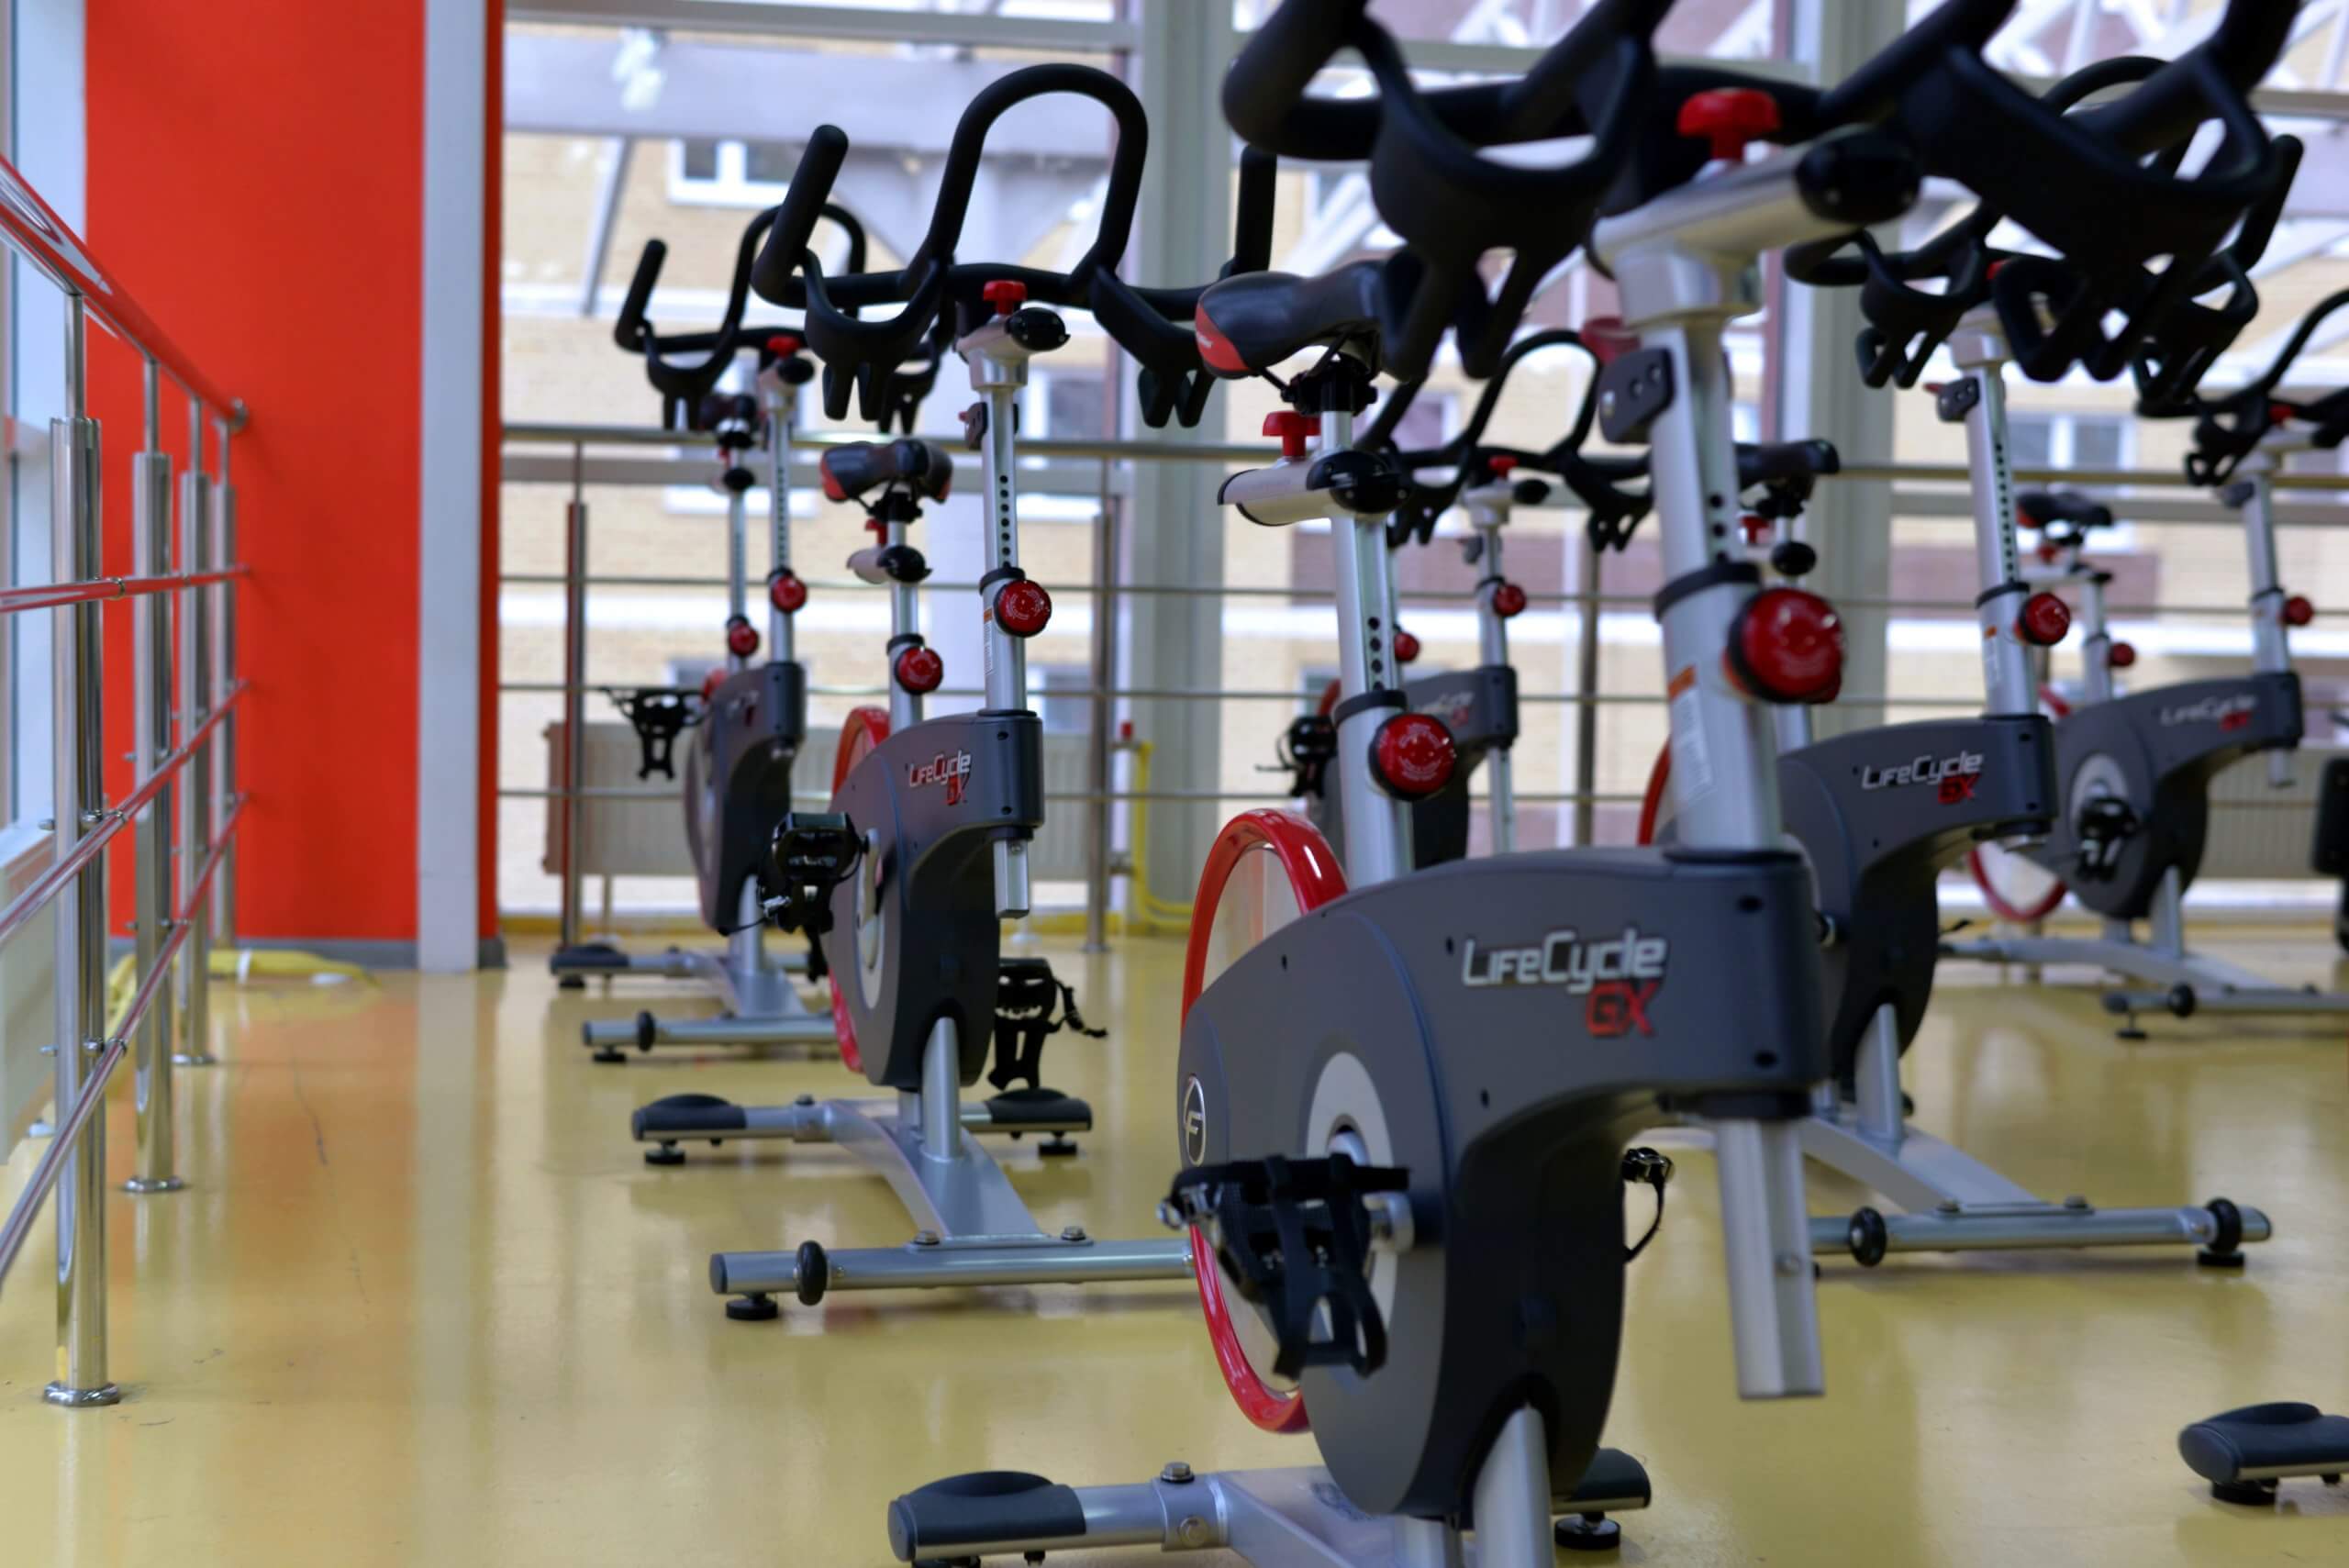 Fitness Centre and Gyms Vending Machine Solutions | RSL